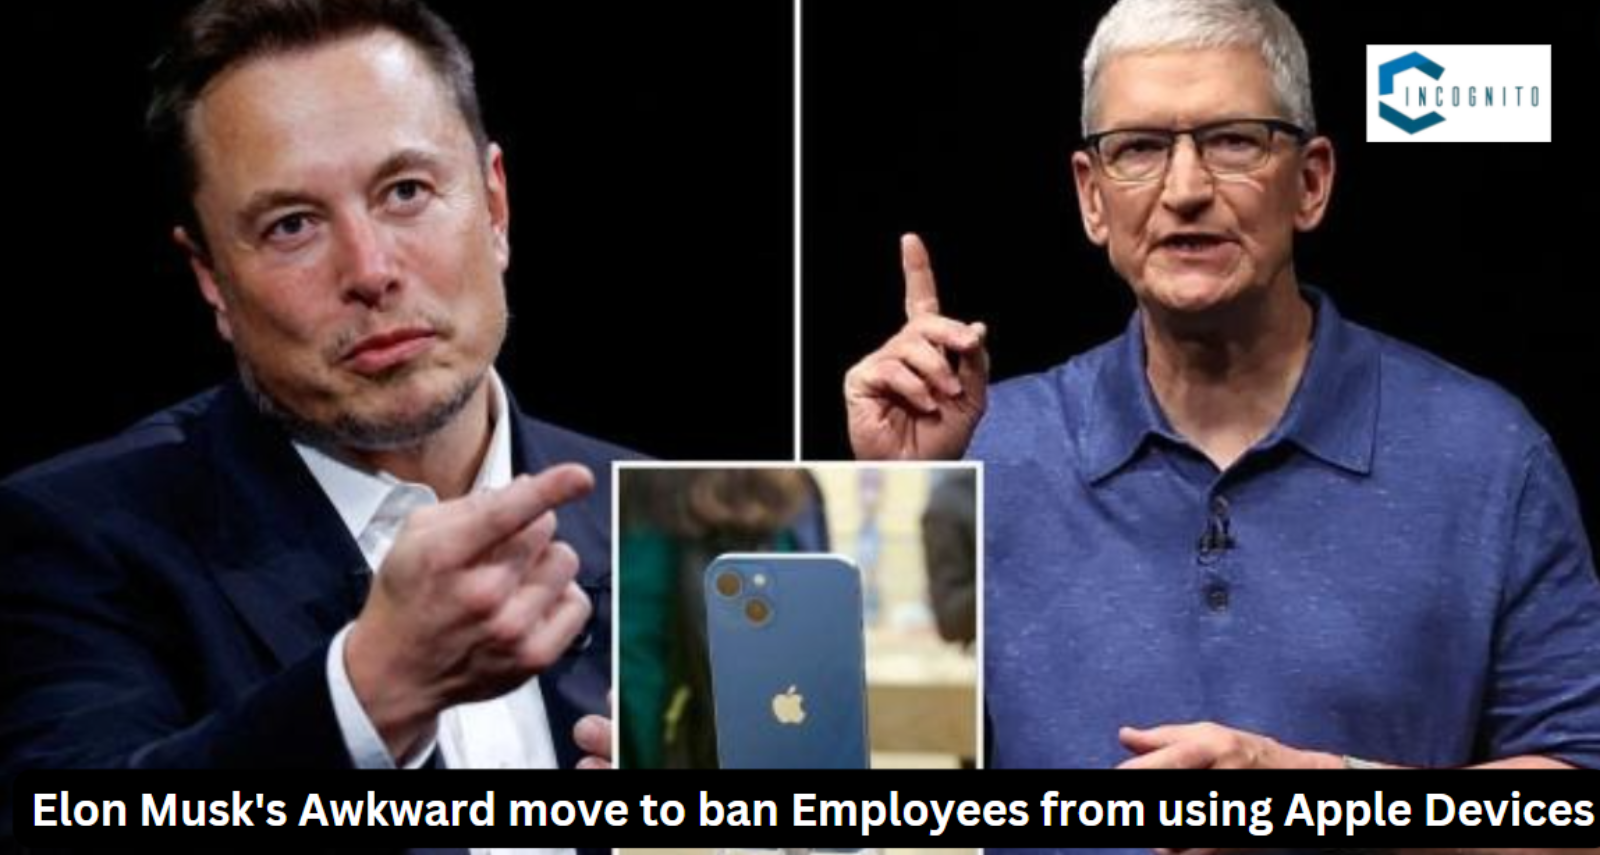 Elon Musk's Awkward move to ban Employees from using Apple Devices